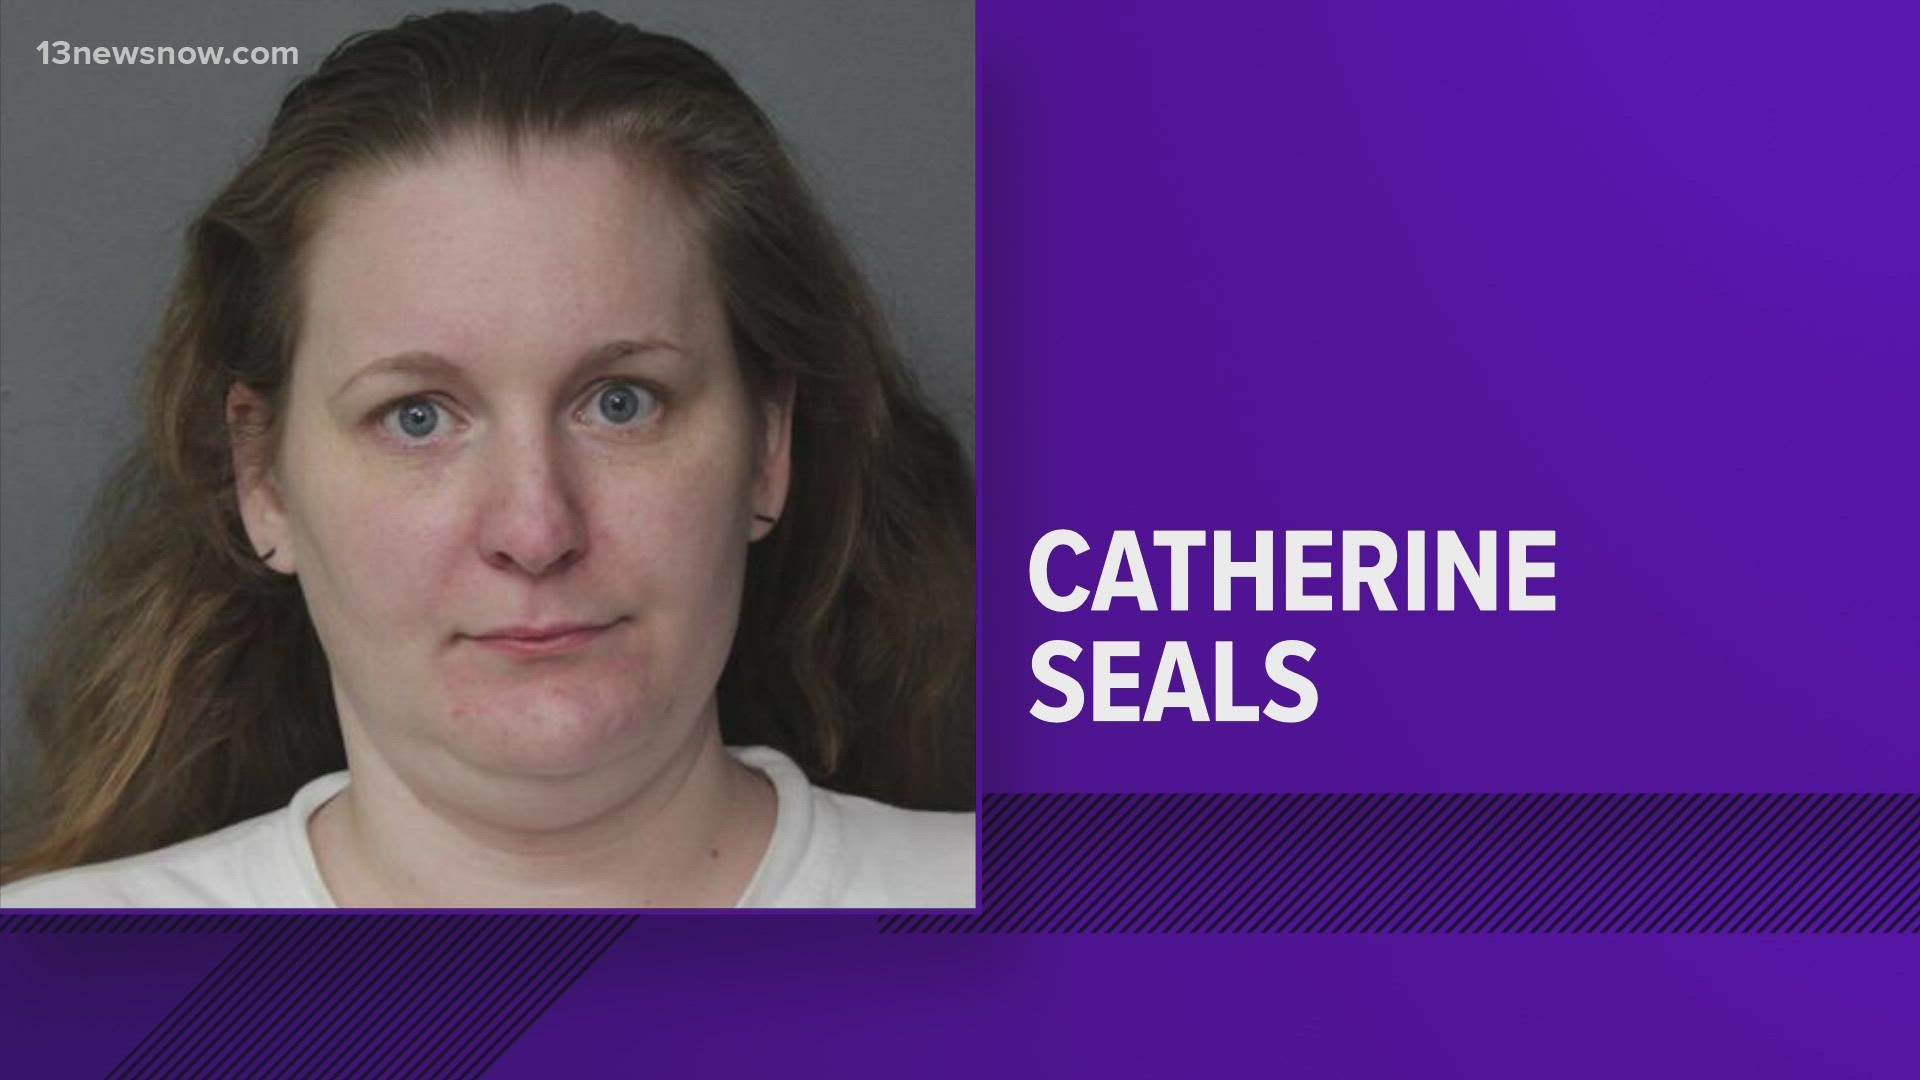 Catherine Seals pleaded guilty to felony homicide and child abuse charges for the death of Larkin Carr in 2018.